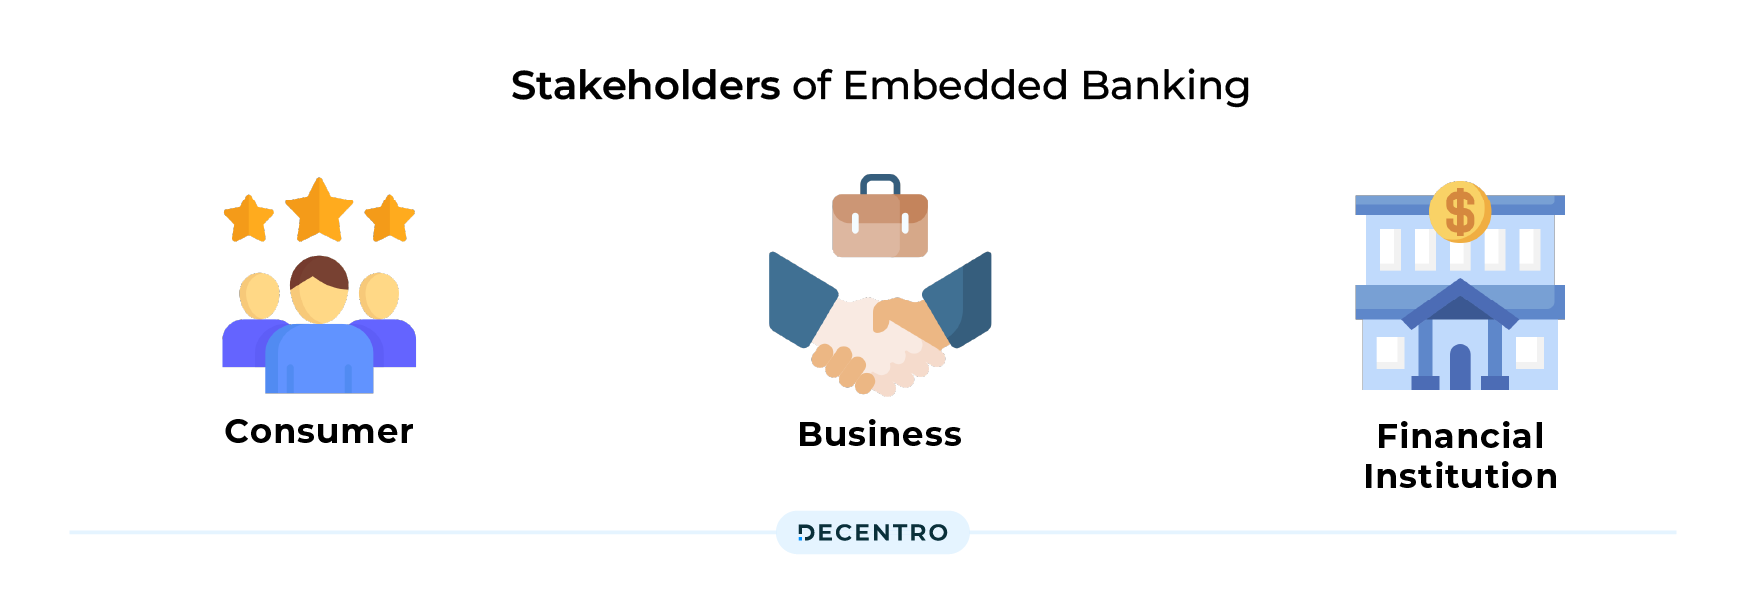 Stakeholders of Embedded Banking